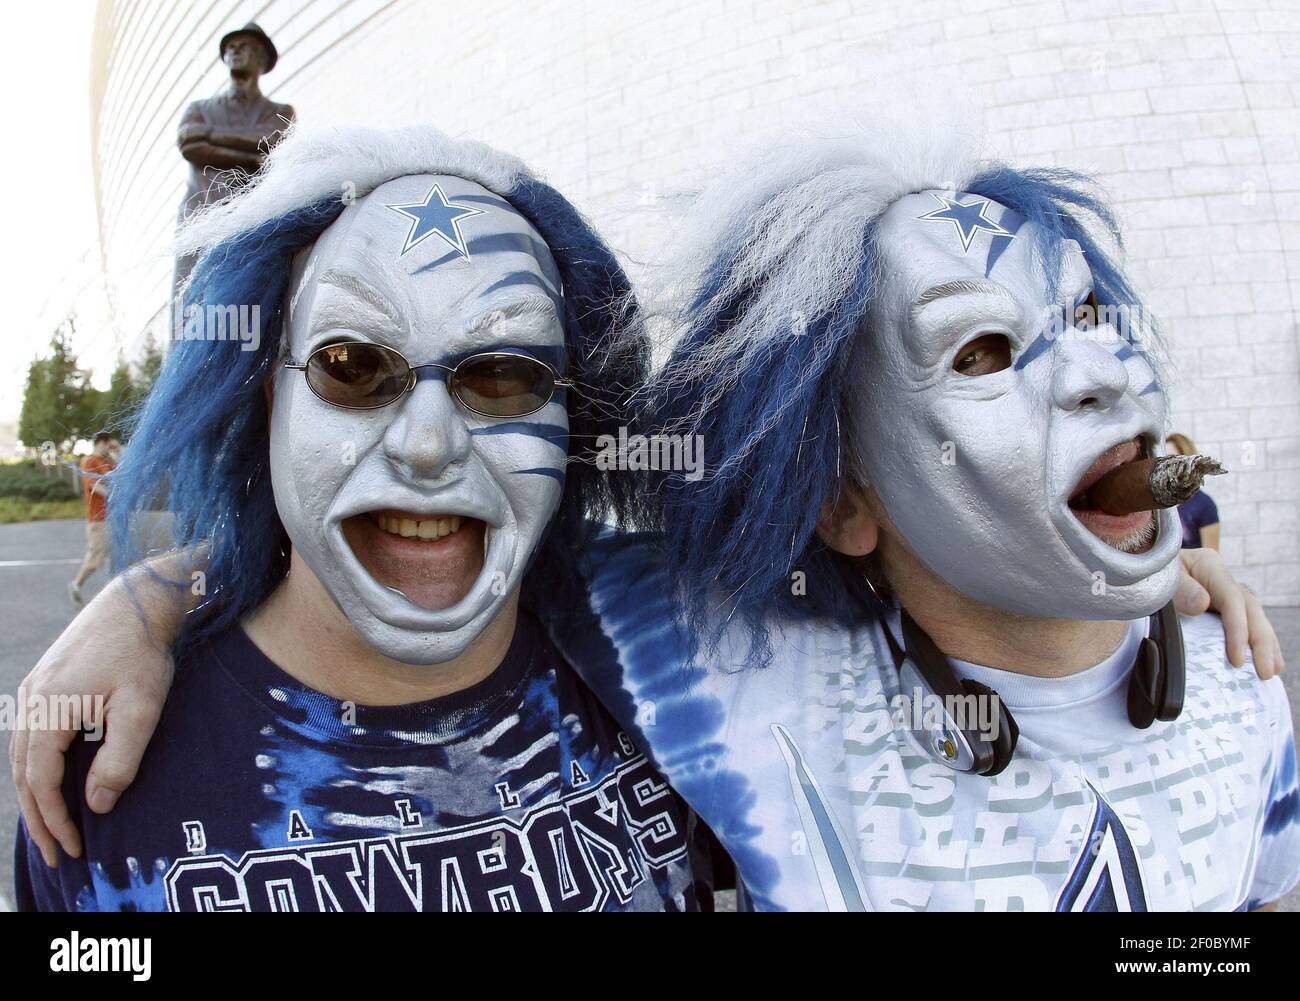 Dallas Cowboy fans Walter Rubacha and Rene Leveille came from Conneticute for the game, posing in their blue and silver Halloween masks near Tom Landry's statue outside Cowboys Stadium in Arlington, Texas, Sunday, October 2, 2011. The Detroit Lions defeated the Cowboys, 34-30. (Photo by Paul Moseley/Fort Worth Star-Telegram/MCT/Sipa USA) Stock Photo